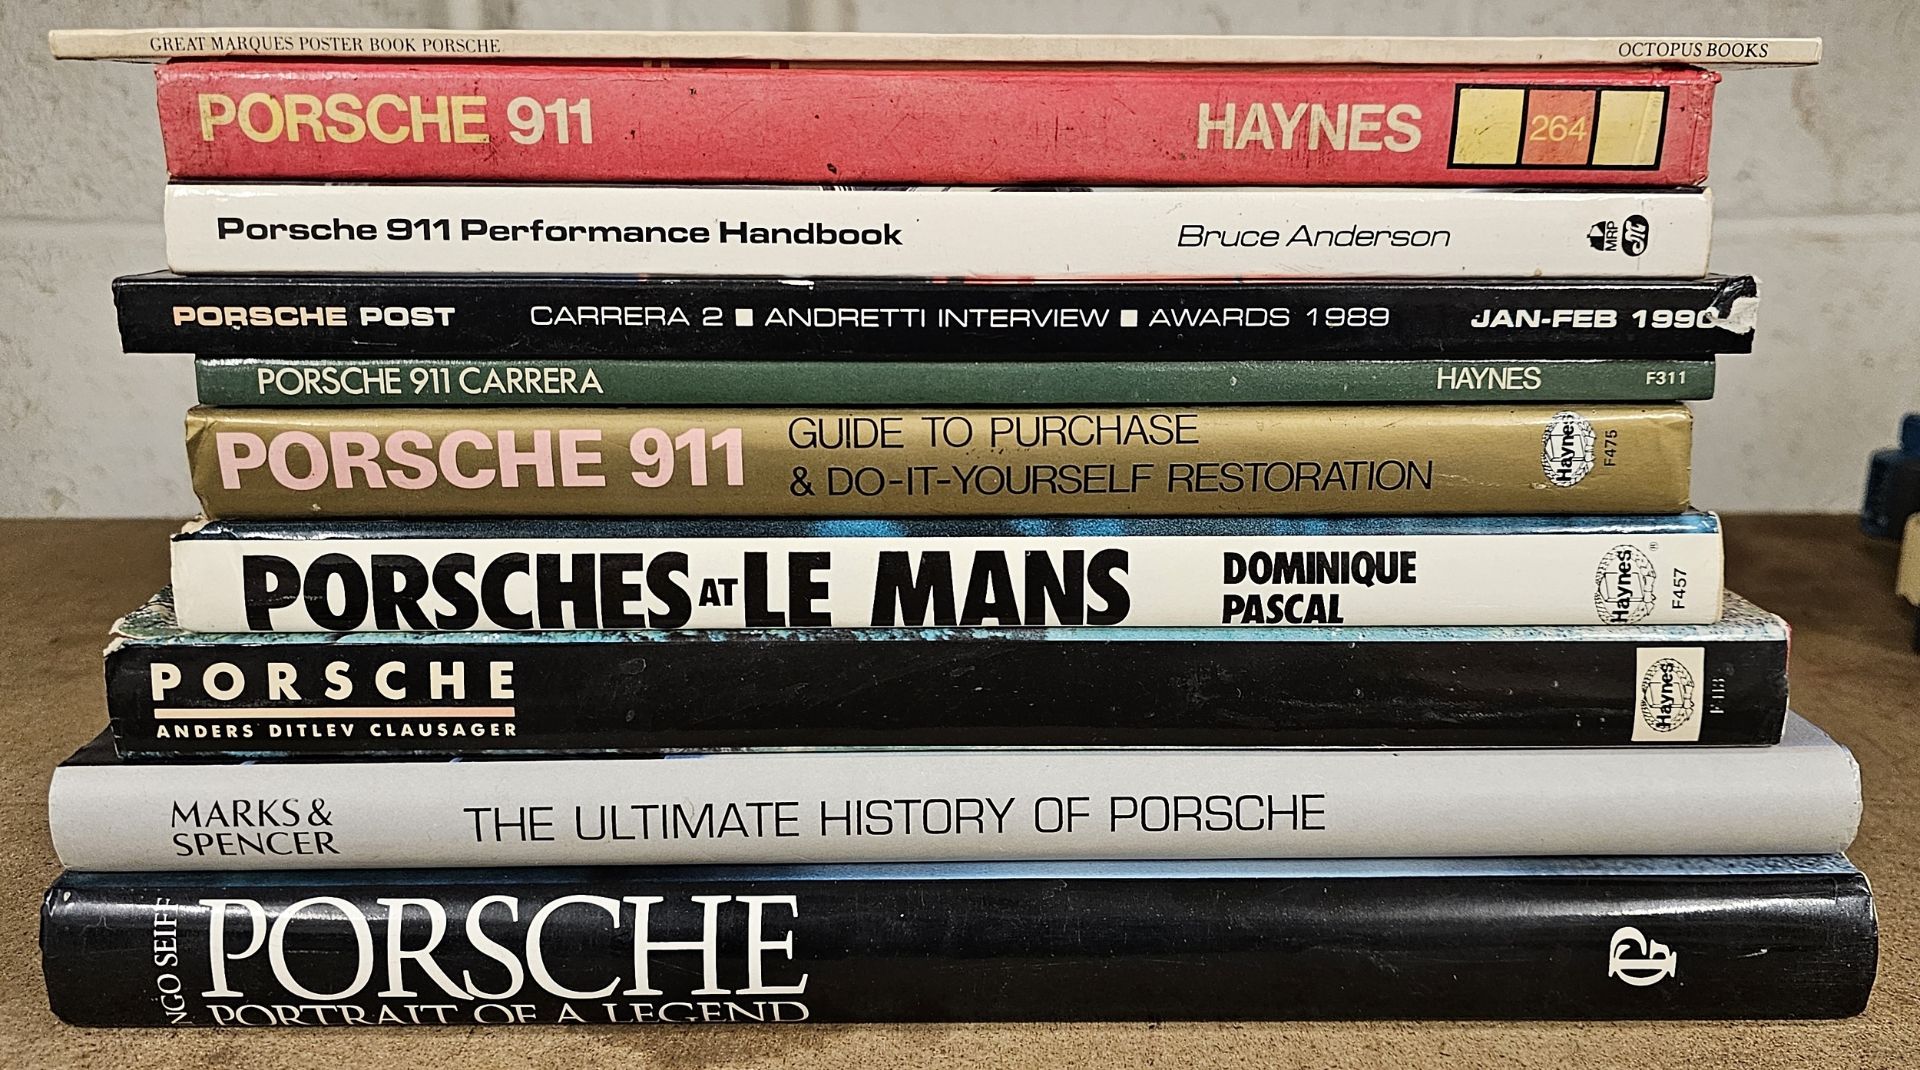 Porsche, ten assorted books, including Porsche 911, guide to purchase and restoration (13)